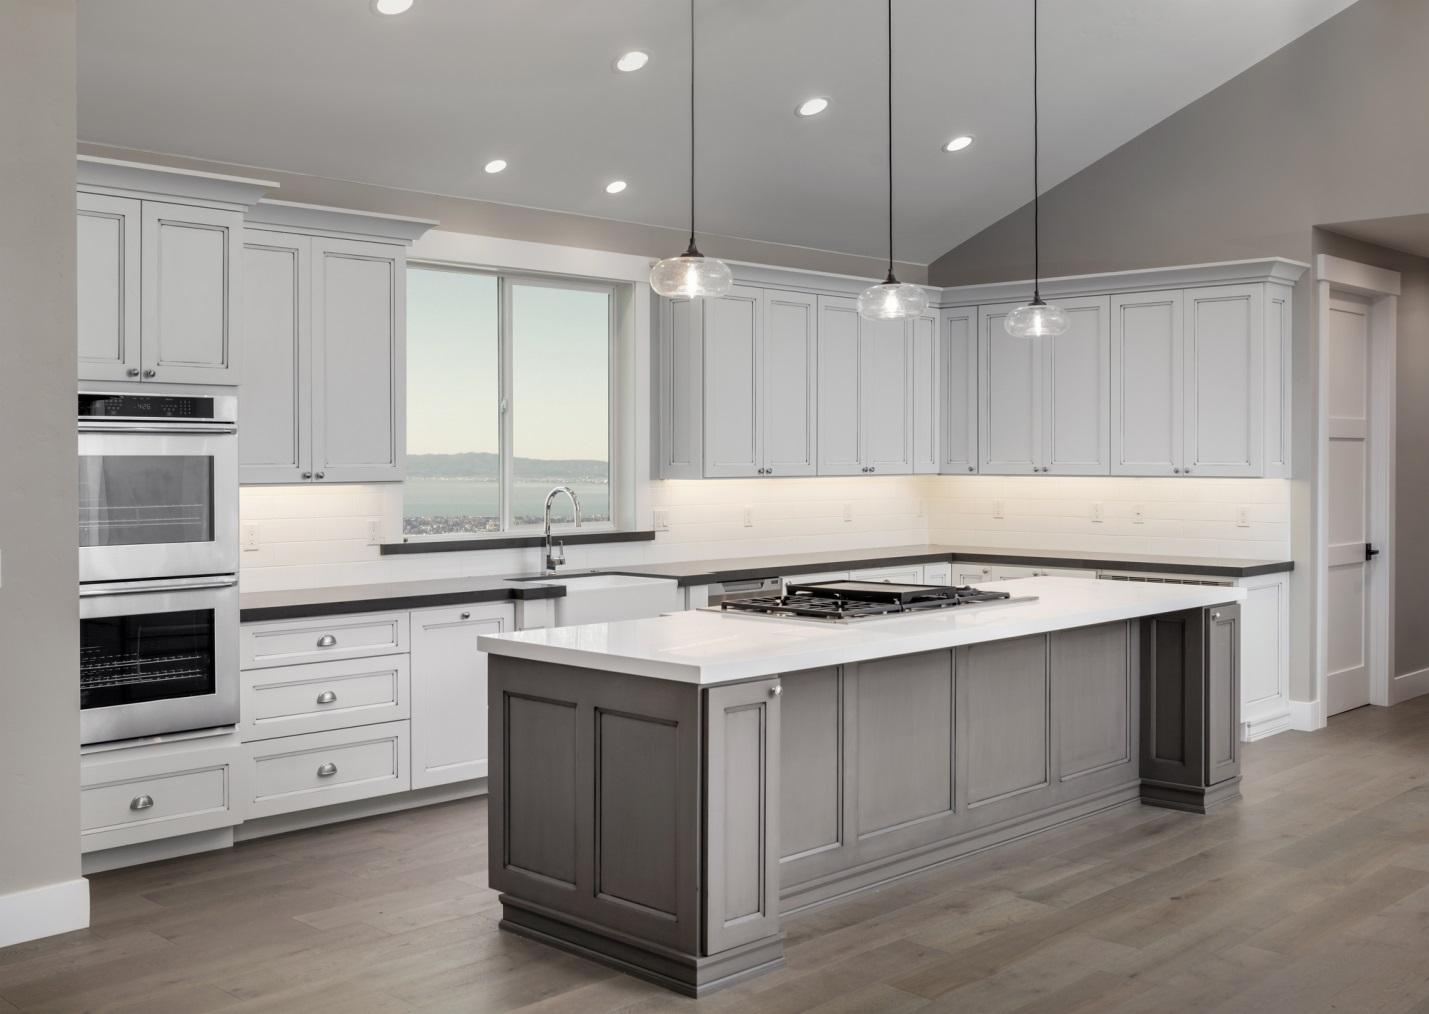 A kitchen with white cabinets and a center island, perfect for kitchen ideas.